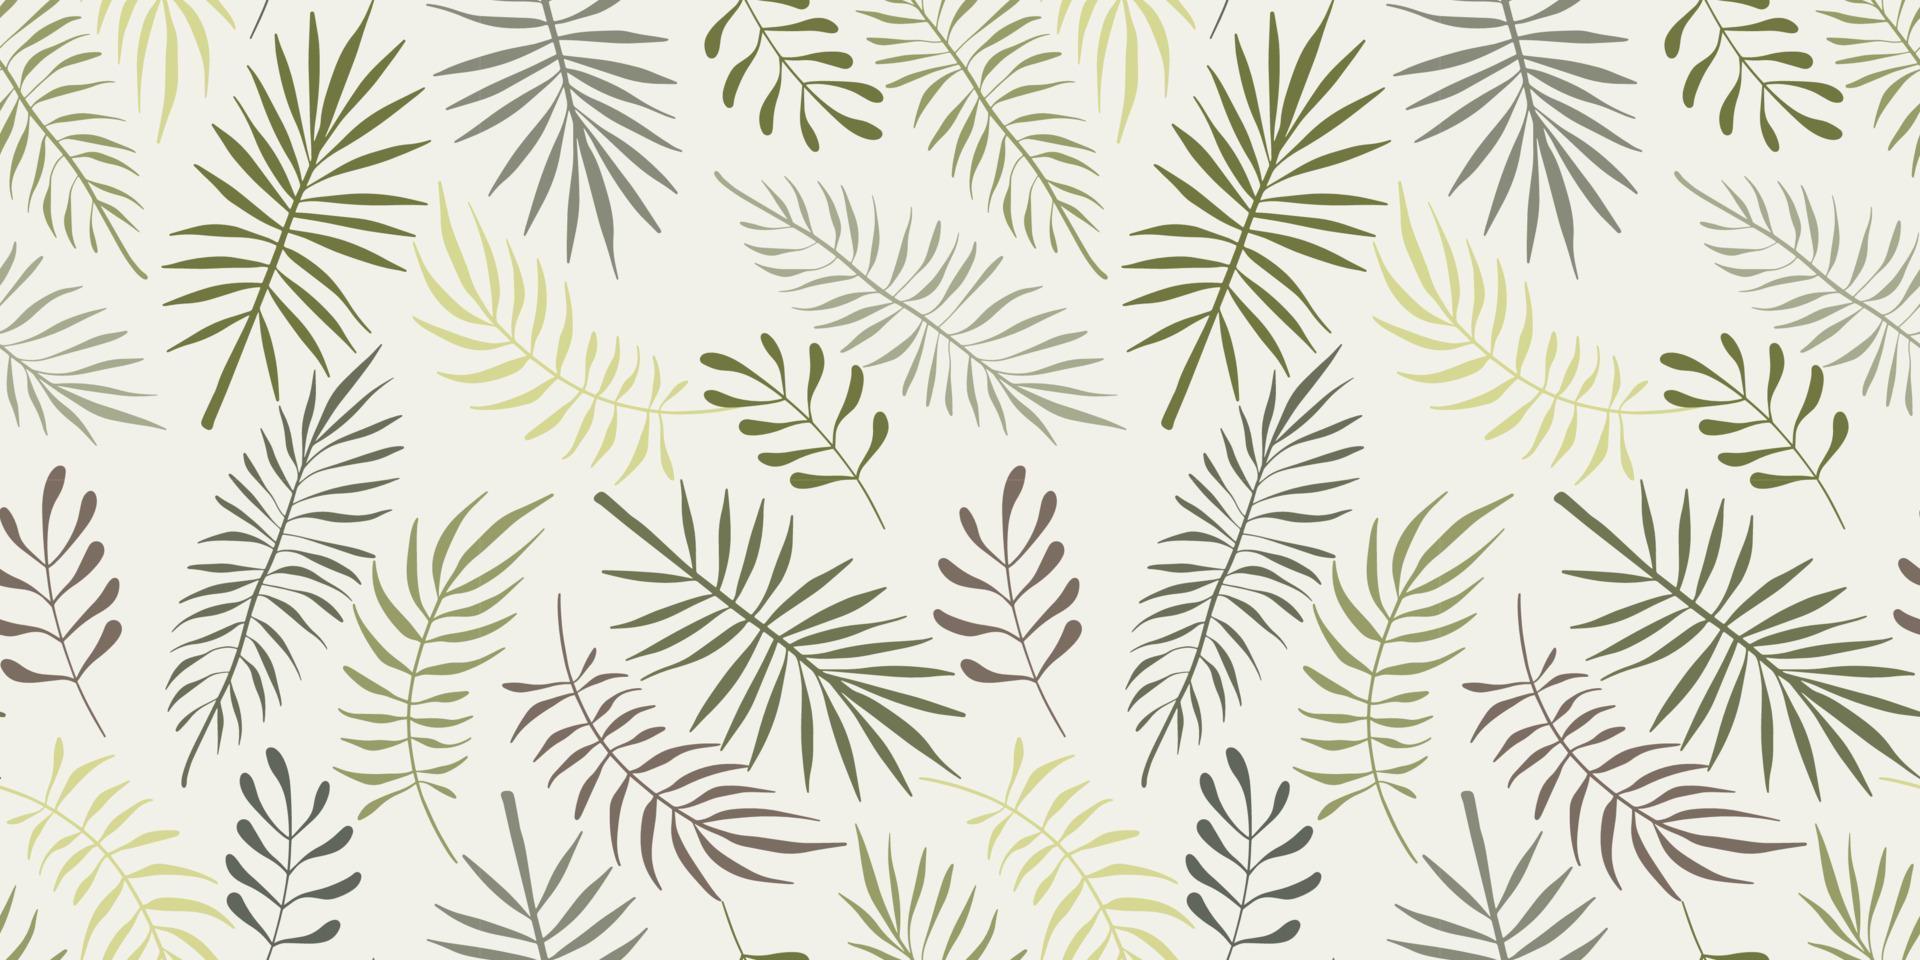 Seamless pattern of Topical Palm leaves on White background. Vector modern summer Branch design for paper, cover, fabric, interior decor